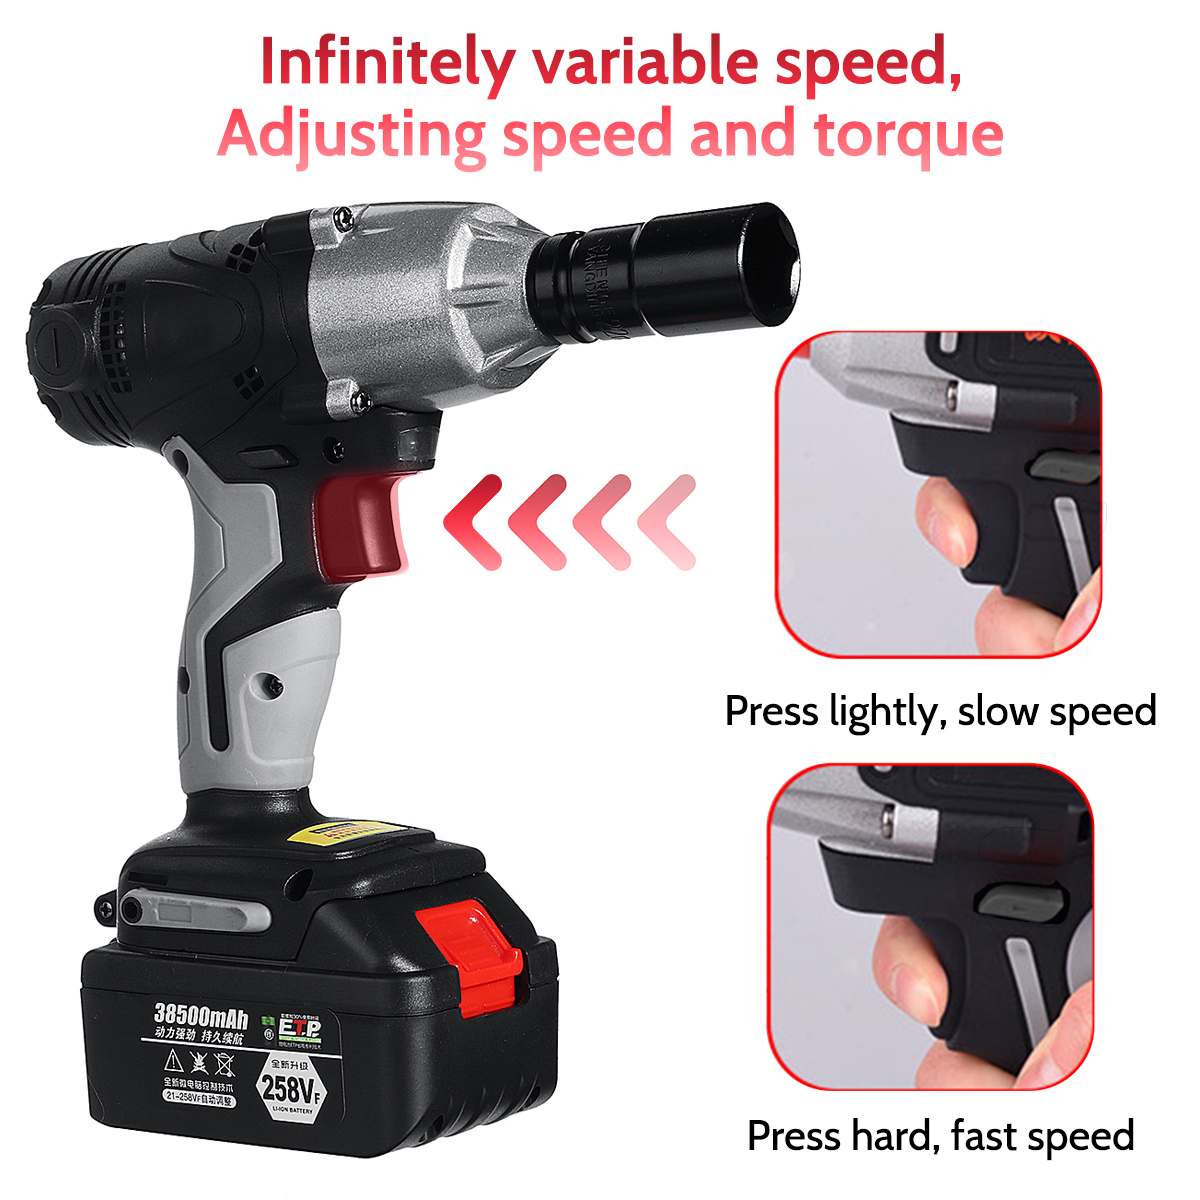 258VF-Cordless-Brushless-Electric-Impact-Wrench-Rechargeable-Wrench-Screwdriver-Power-Tool-W-12pcs-B-1839472-3